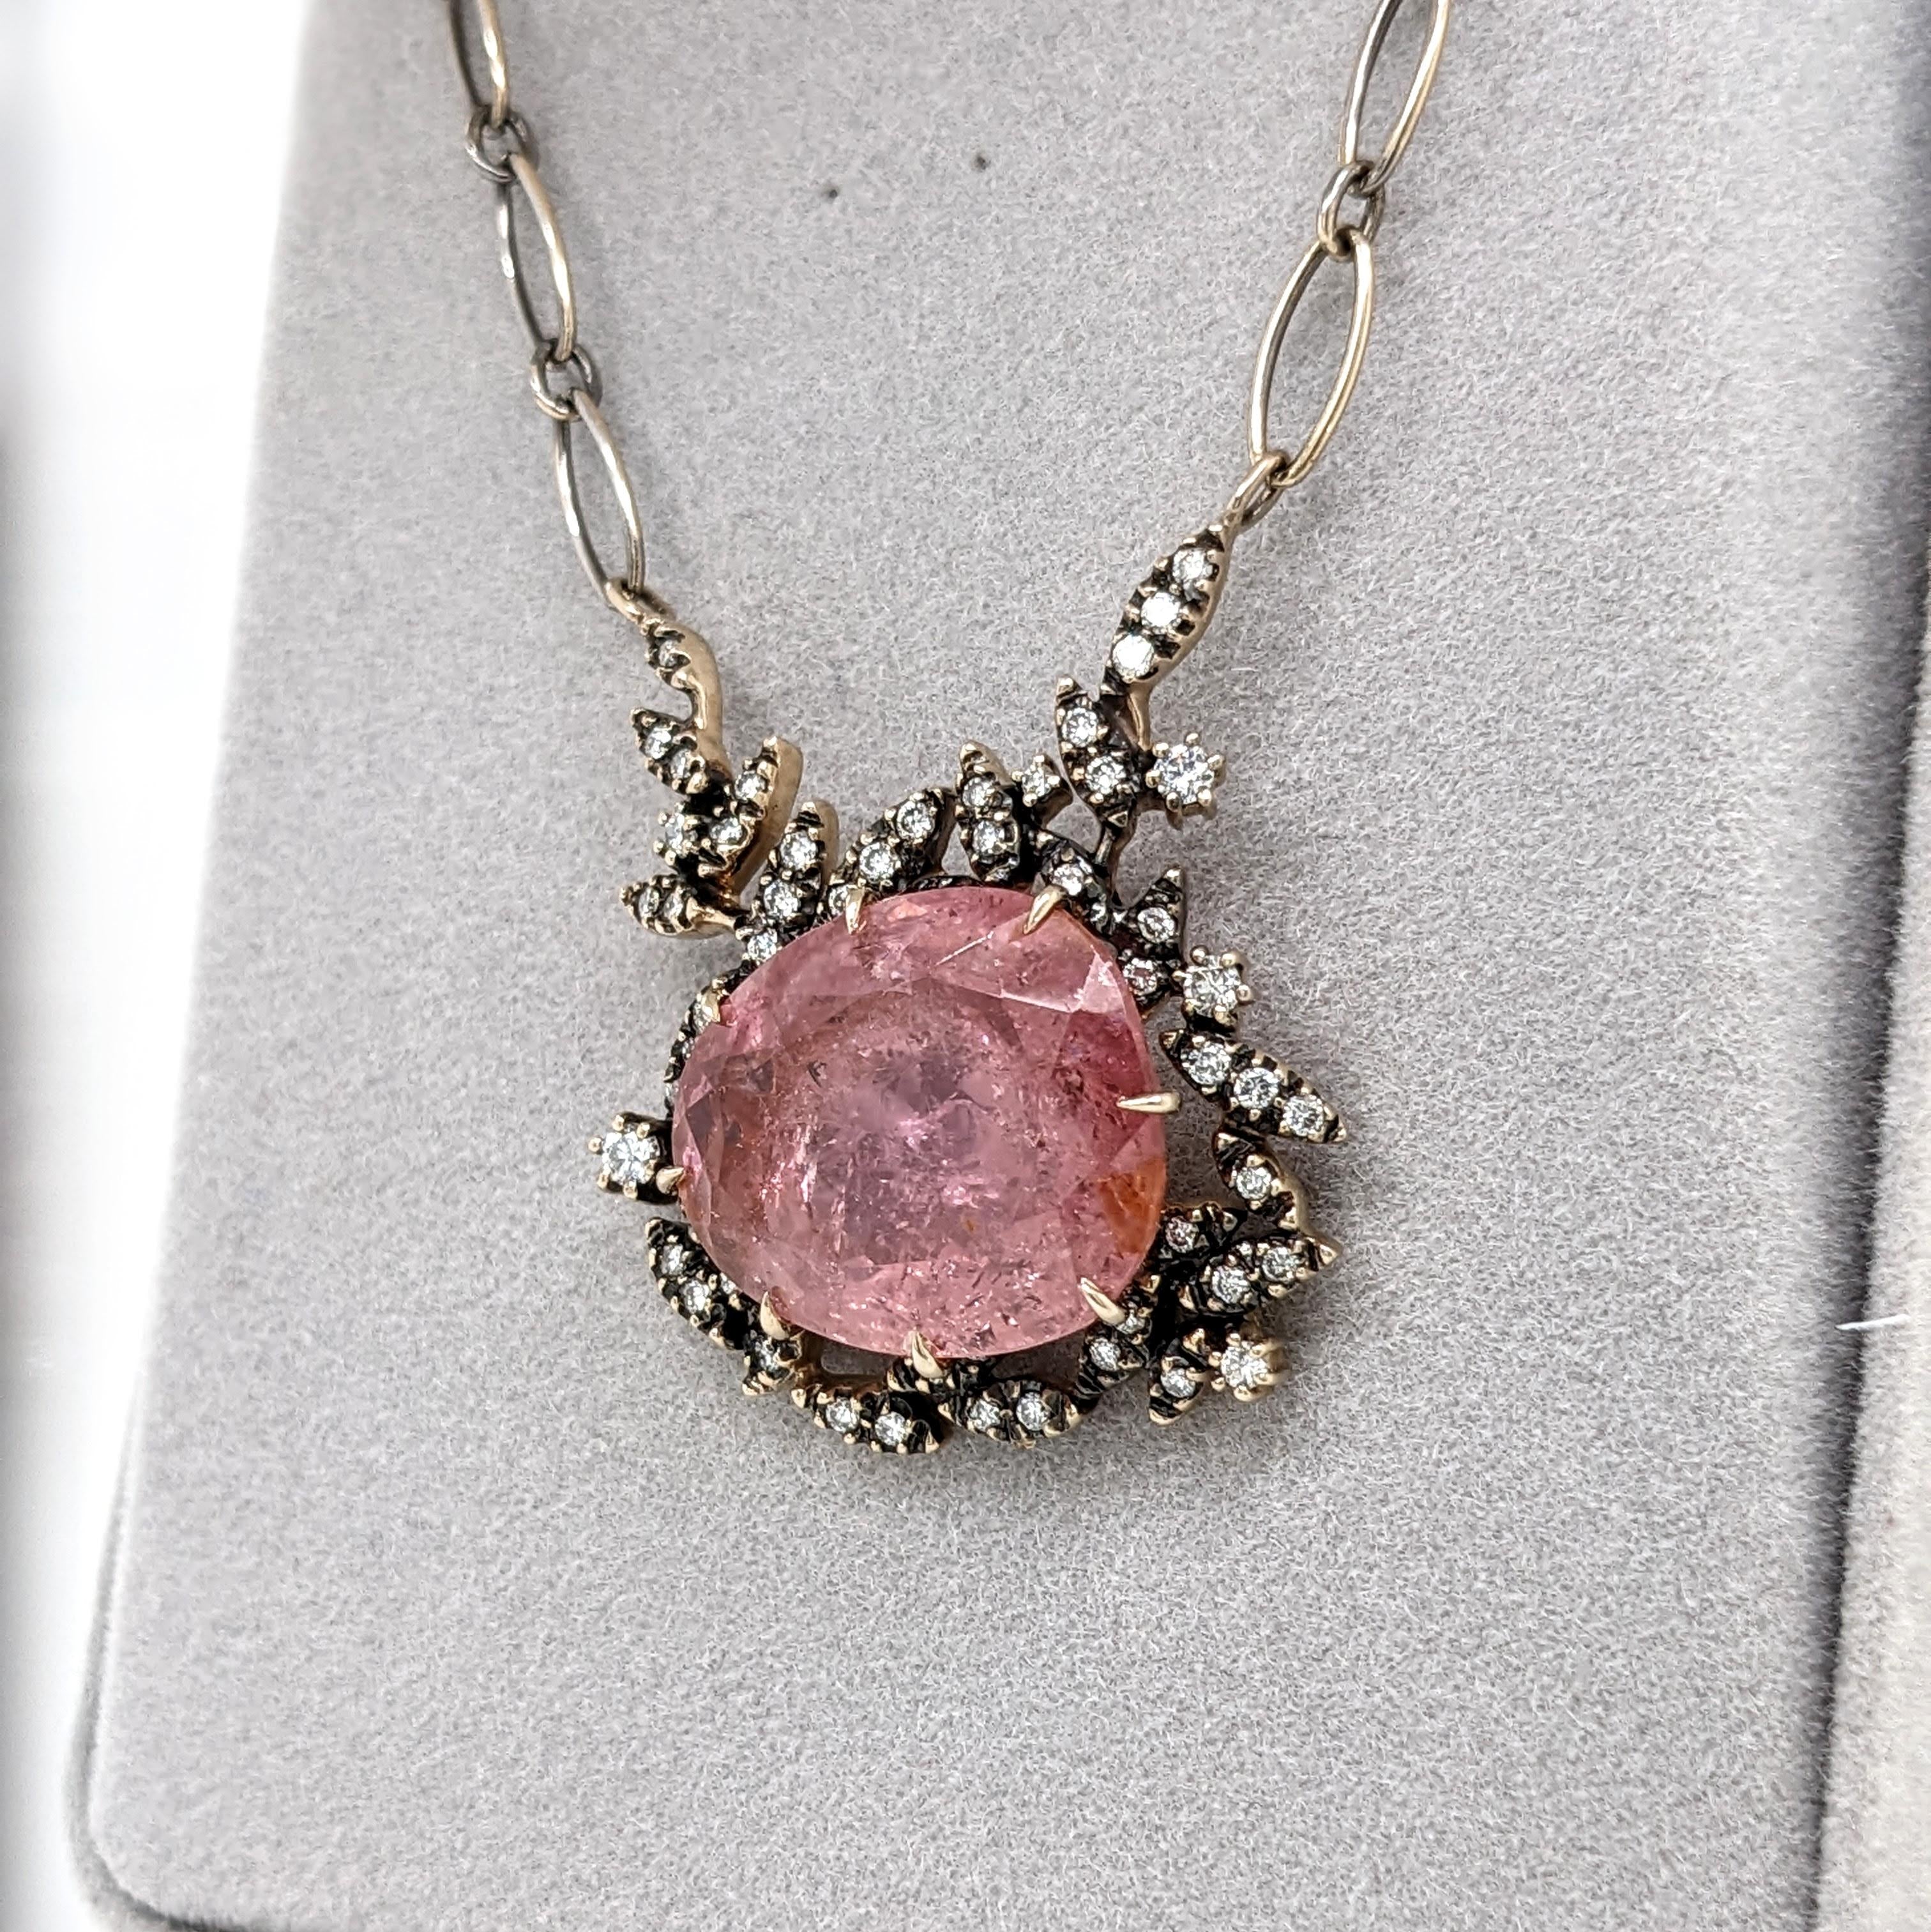 8ct Pink Tourmaline Pendant Necklace w Natural Diamonds in Solid 18K Gold